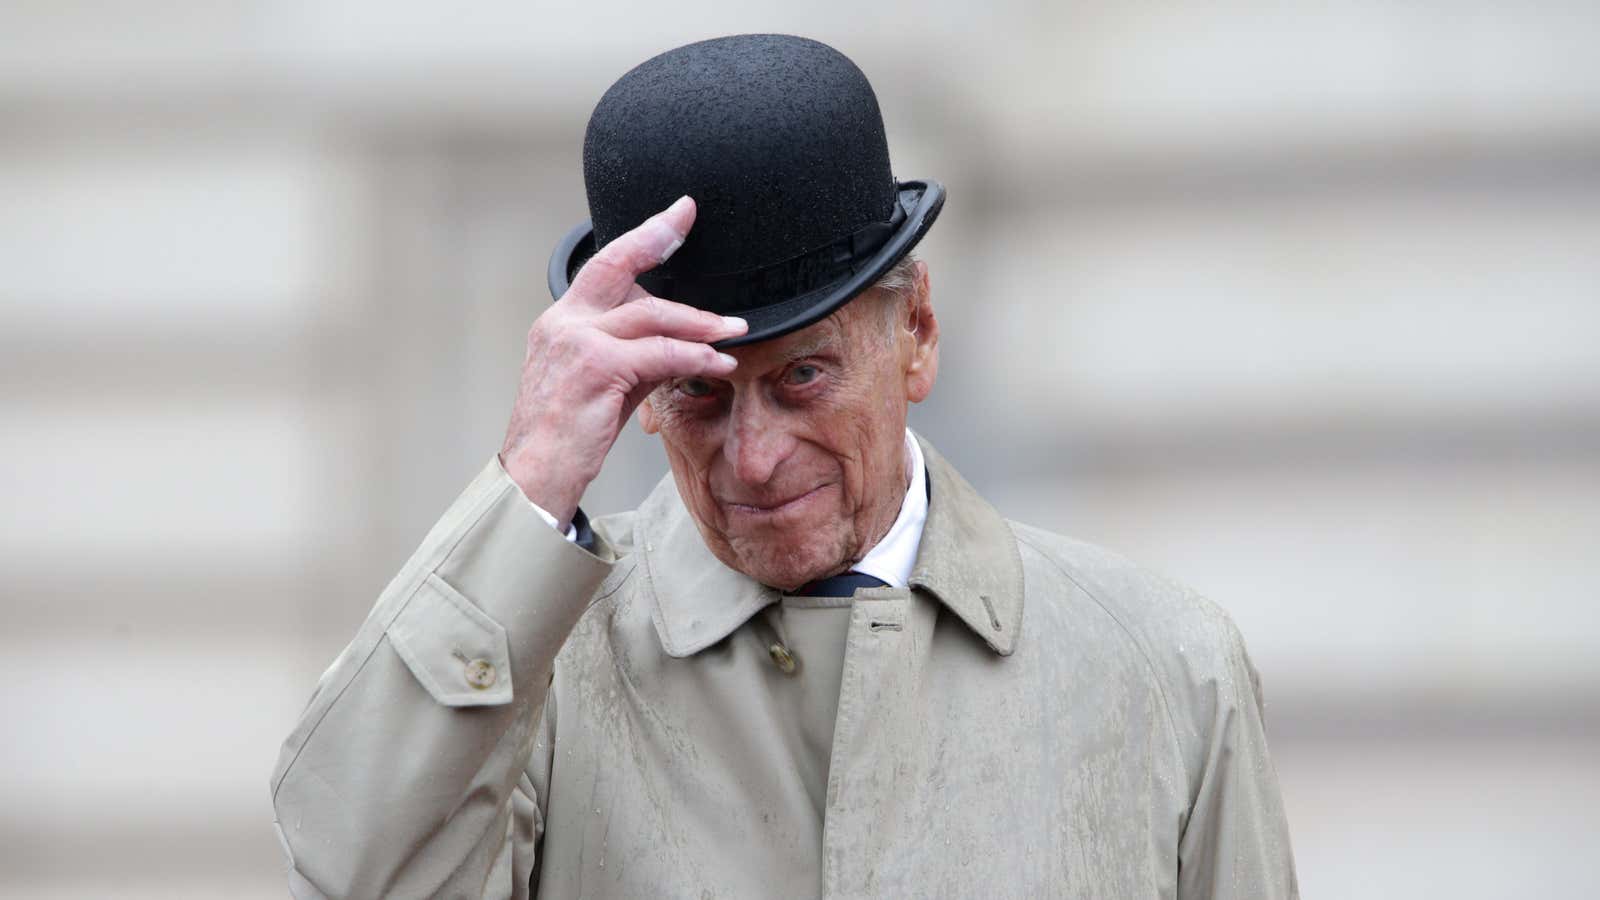 On April 9, the Wikipedia page for Prince Phillip had 3.87 million views—the most of any page in 2021. It was the day he died.